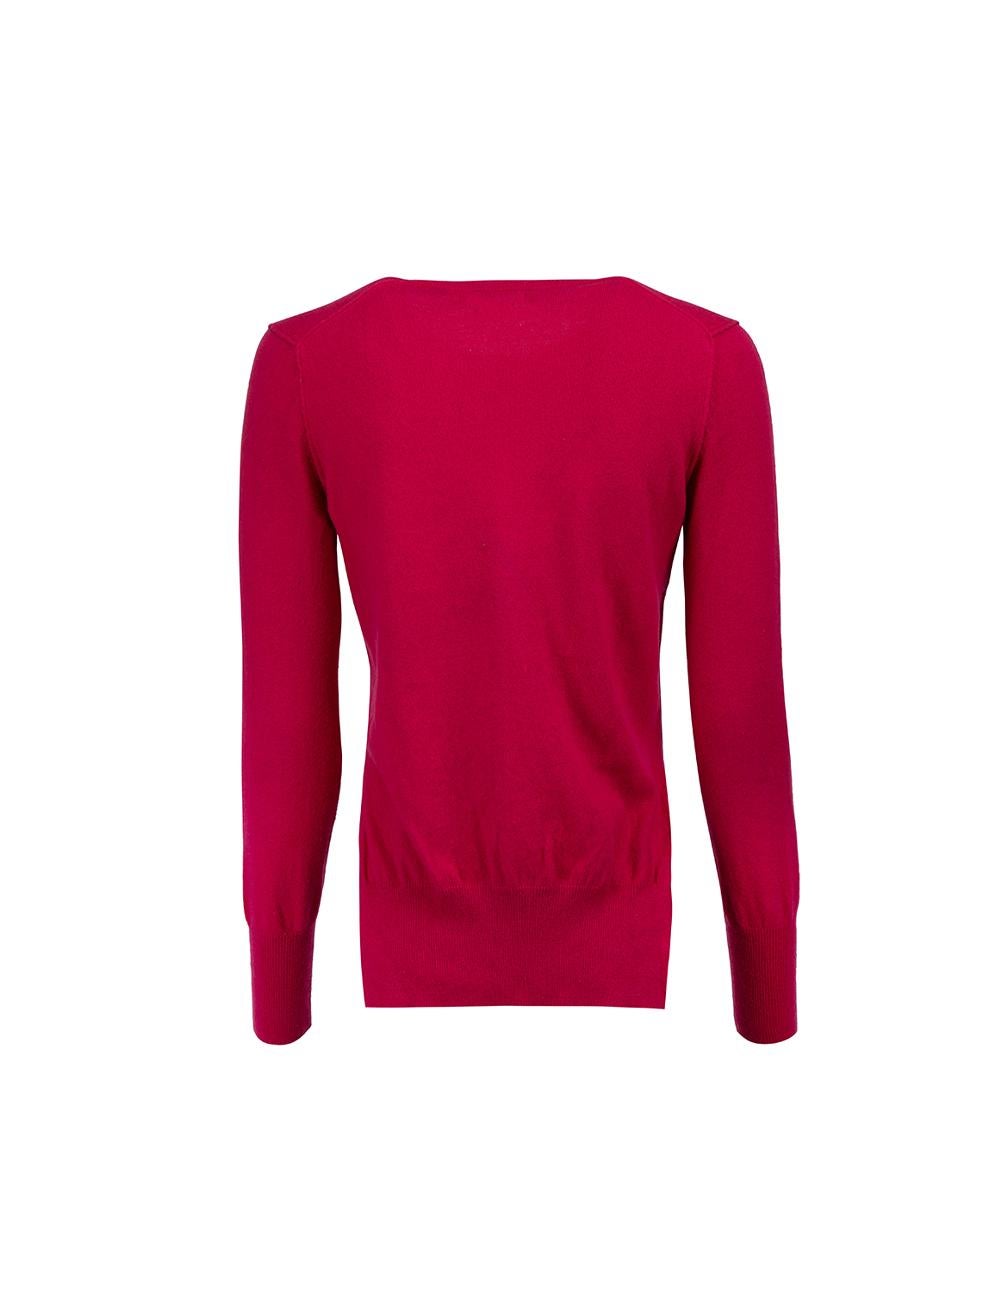 Isabel Marant Étoile Pink Cotton Knit Long Sleeve Sweater Size XS In Good Condition For Sale In London, GB